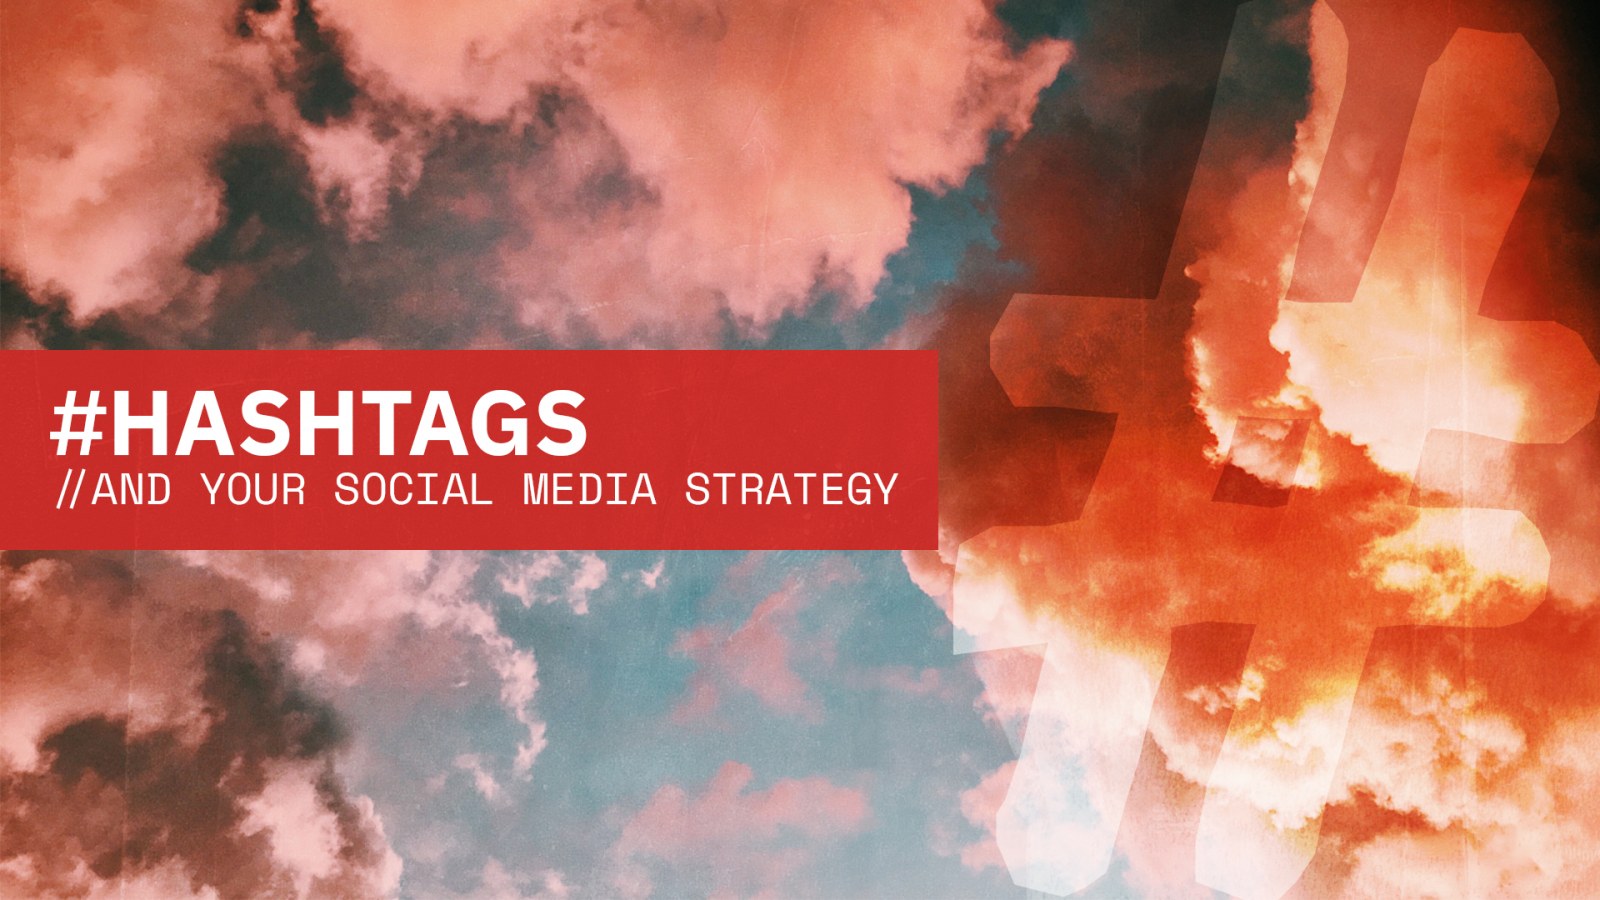 Hashtags and Your Social Media Strategy